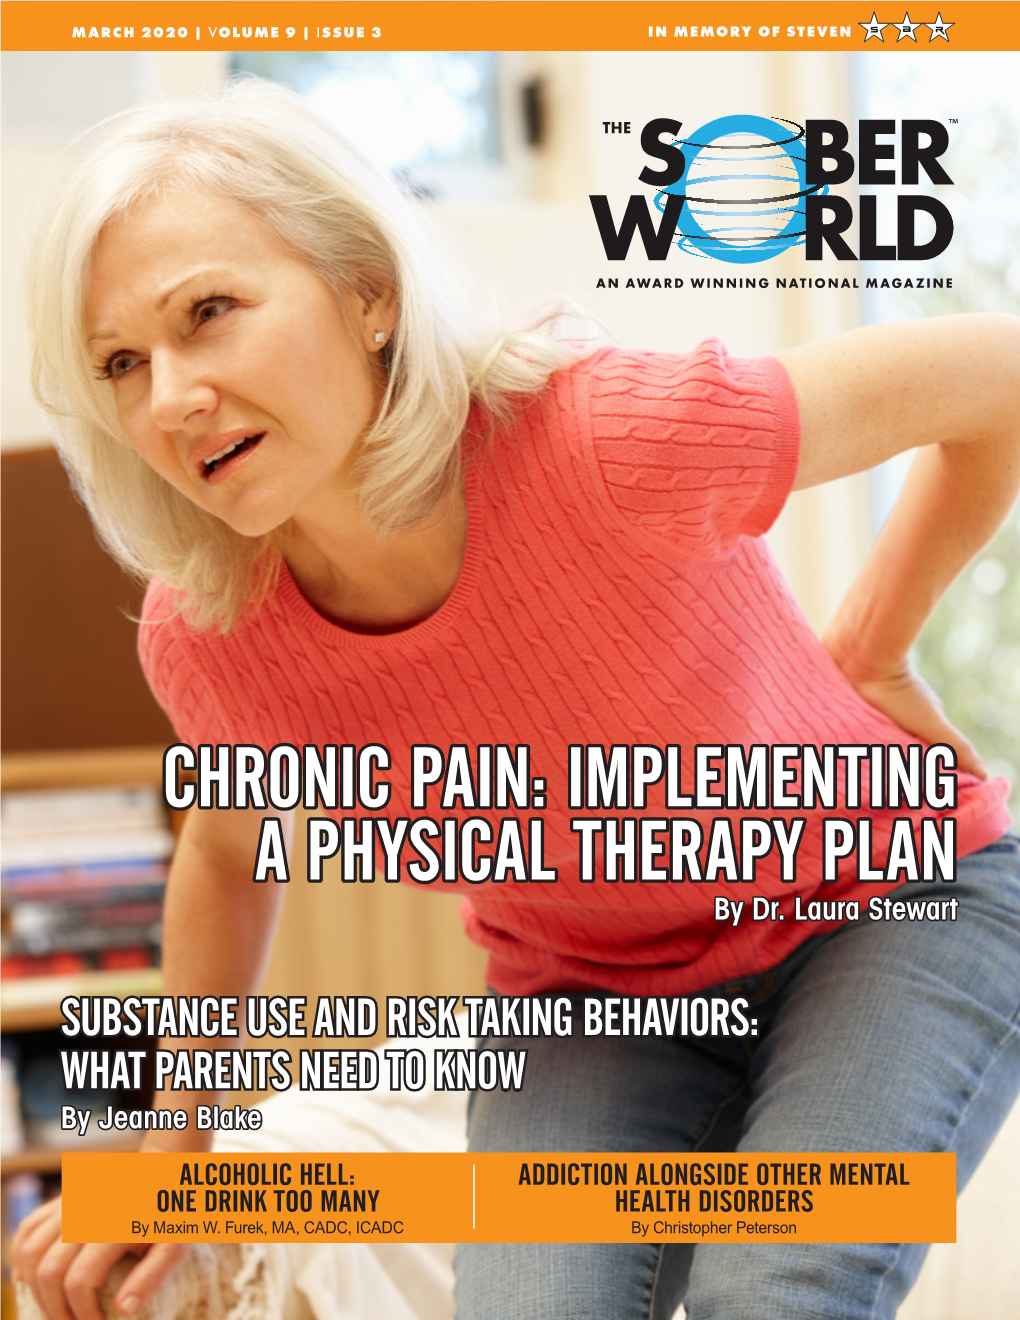 CHRONIC PAIN: IMPLEMENTING a PHYSICAL THERAPY PLAN by Dr